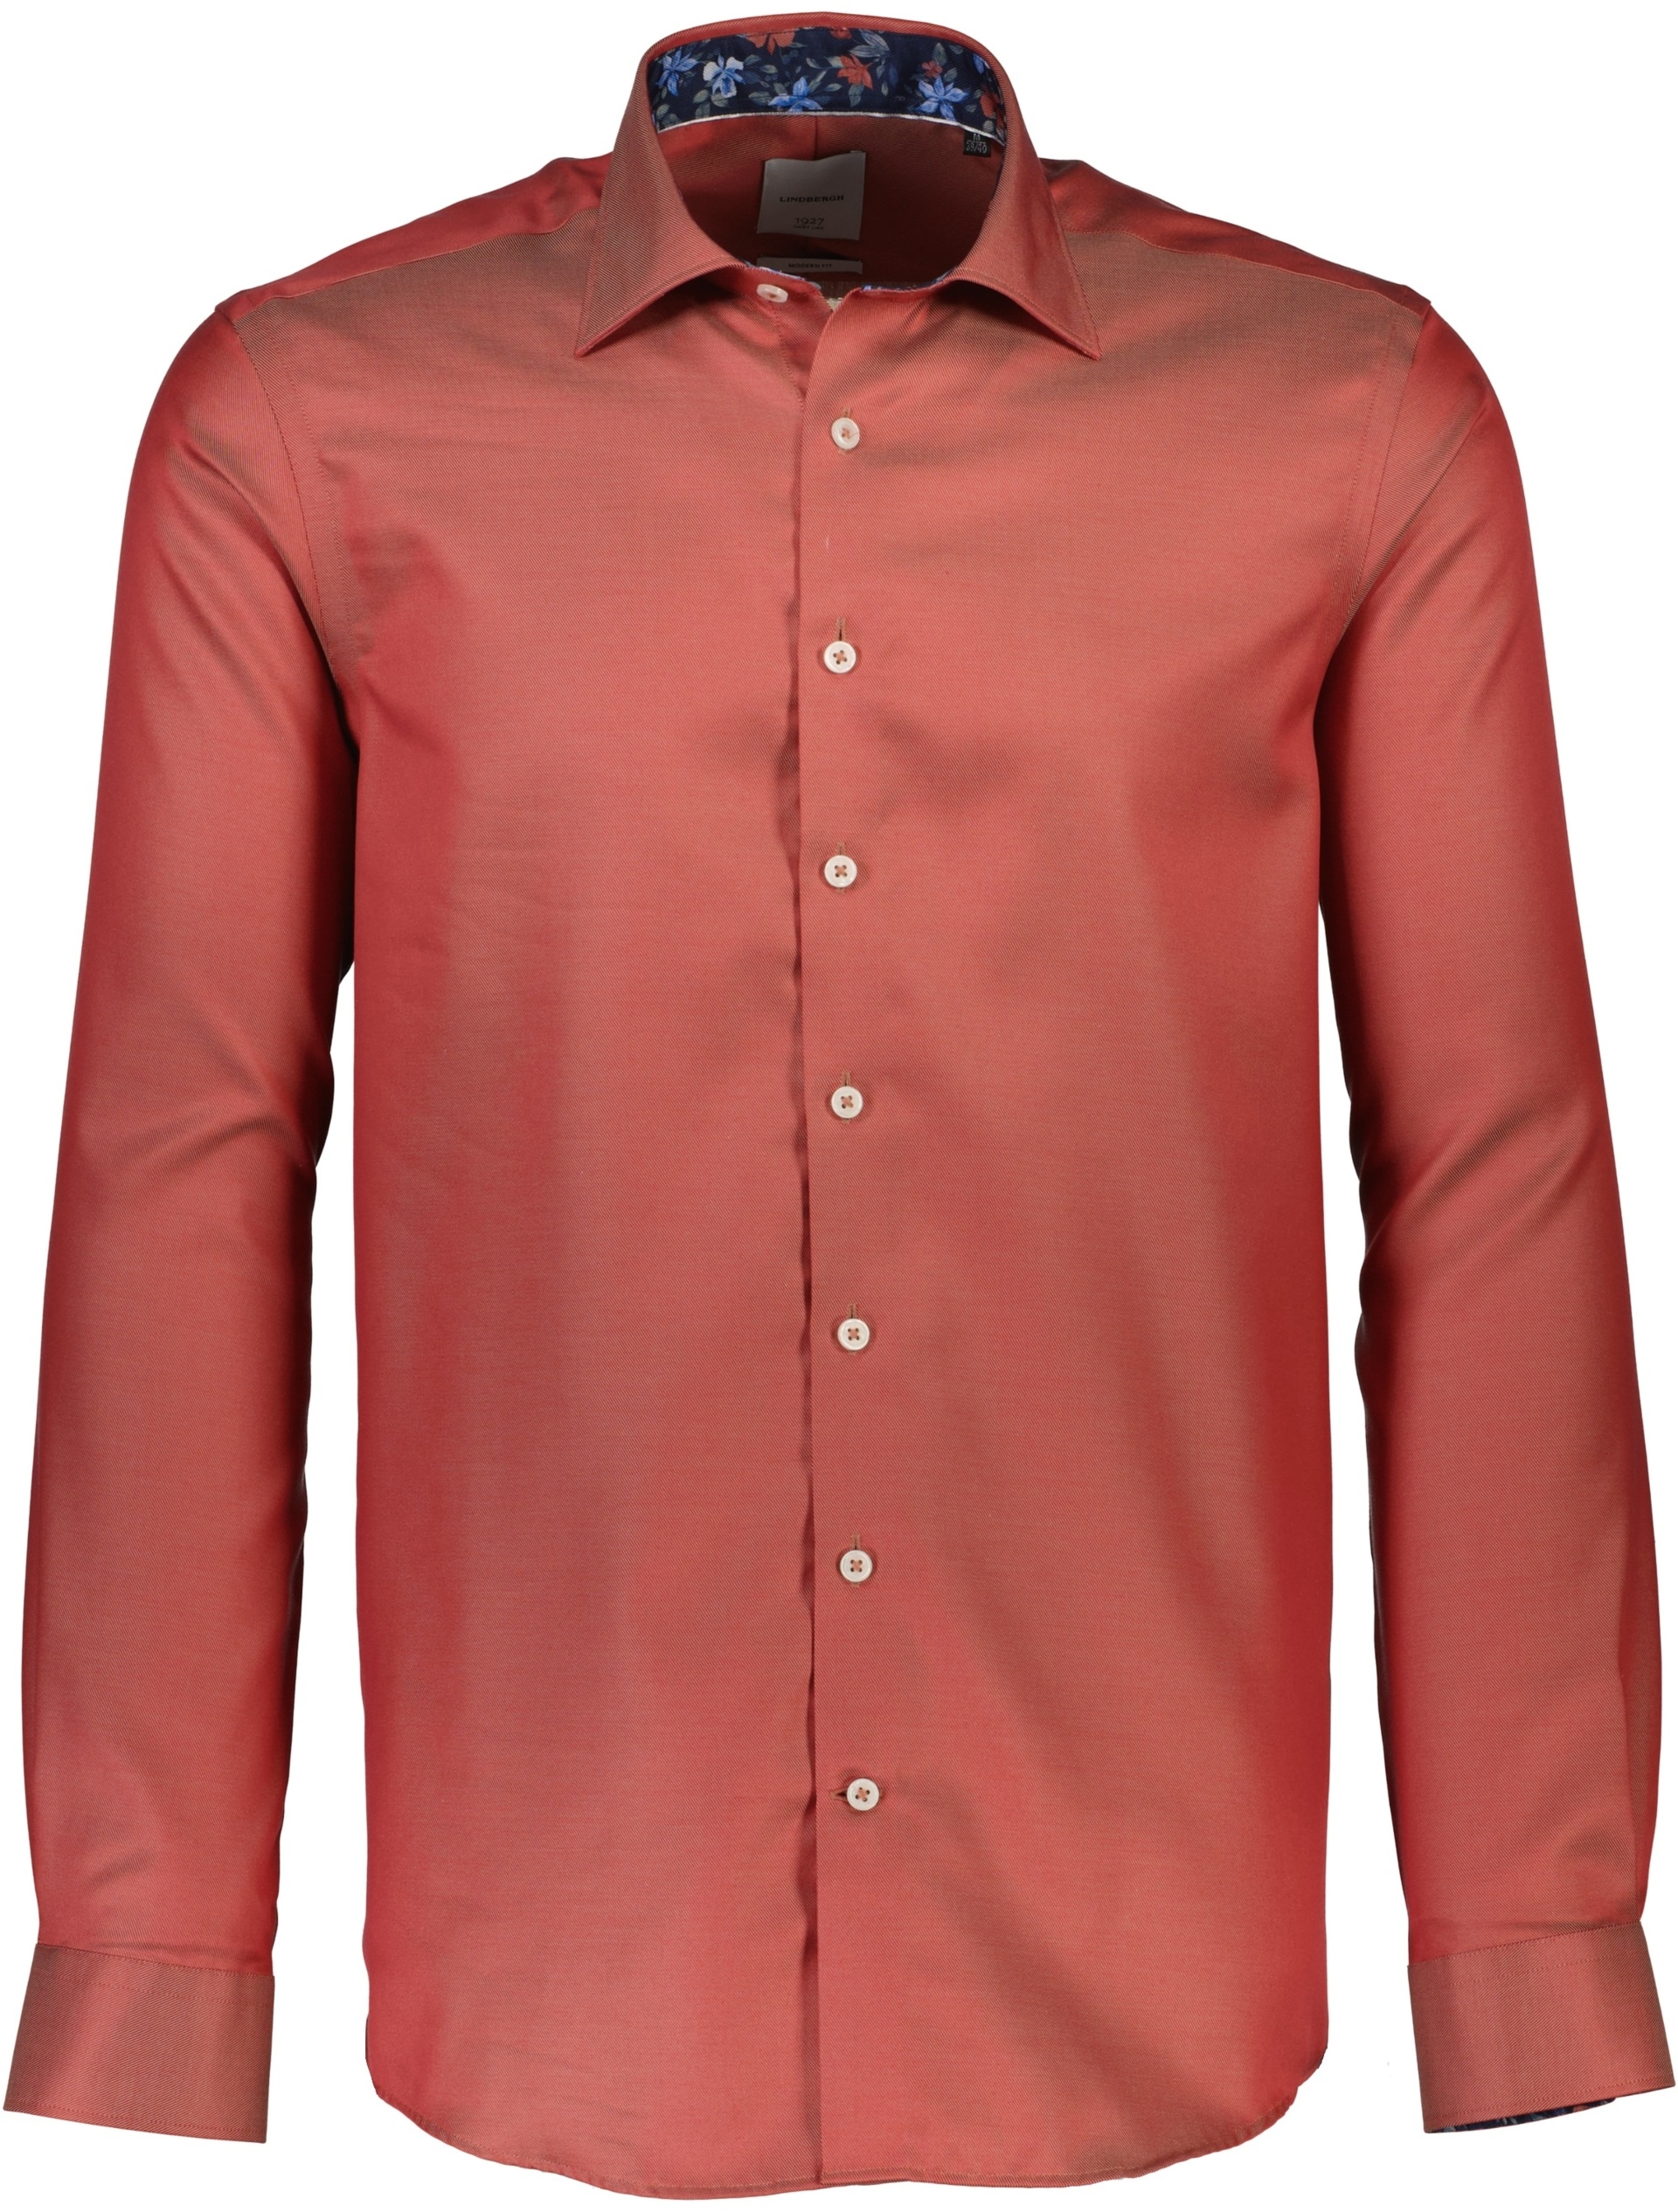 Lindbergh Business casual shirt red / red mix